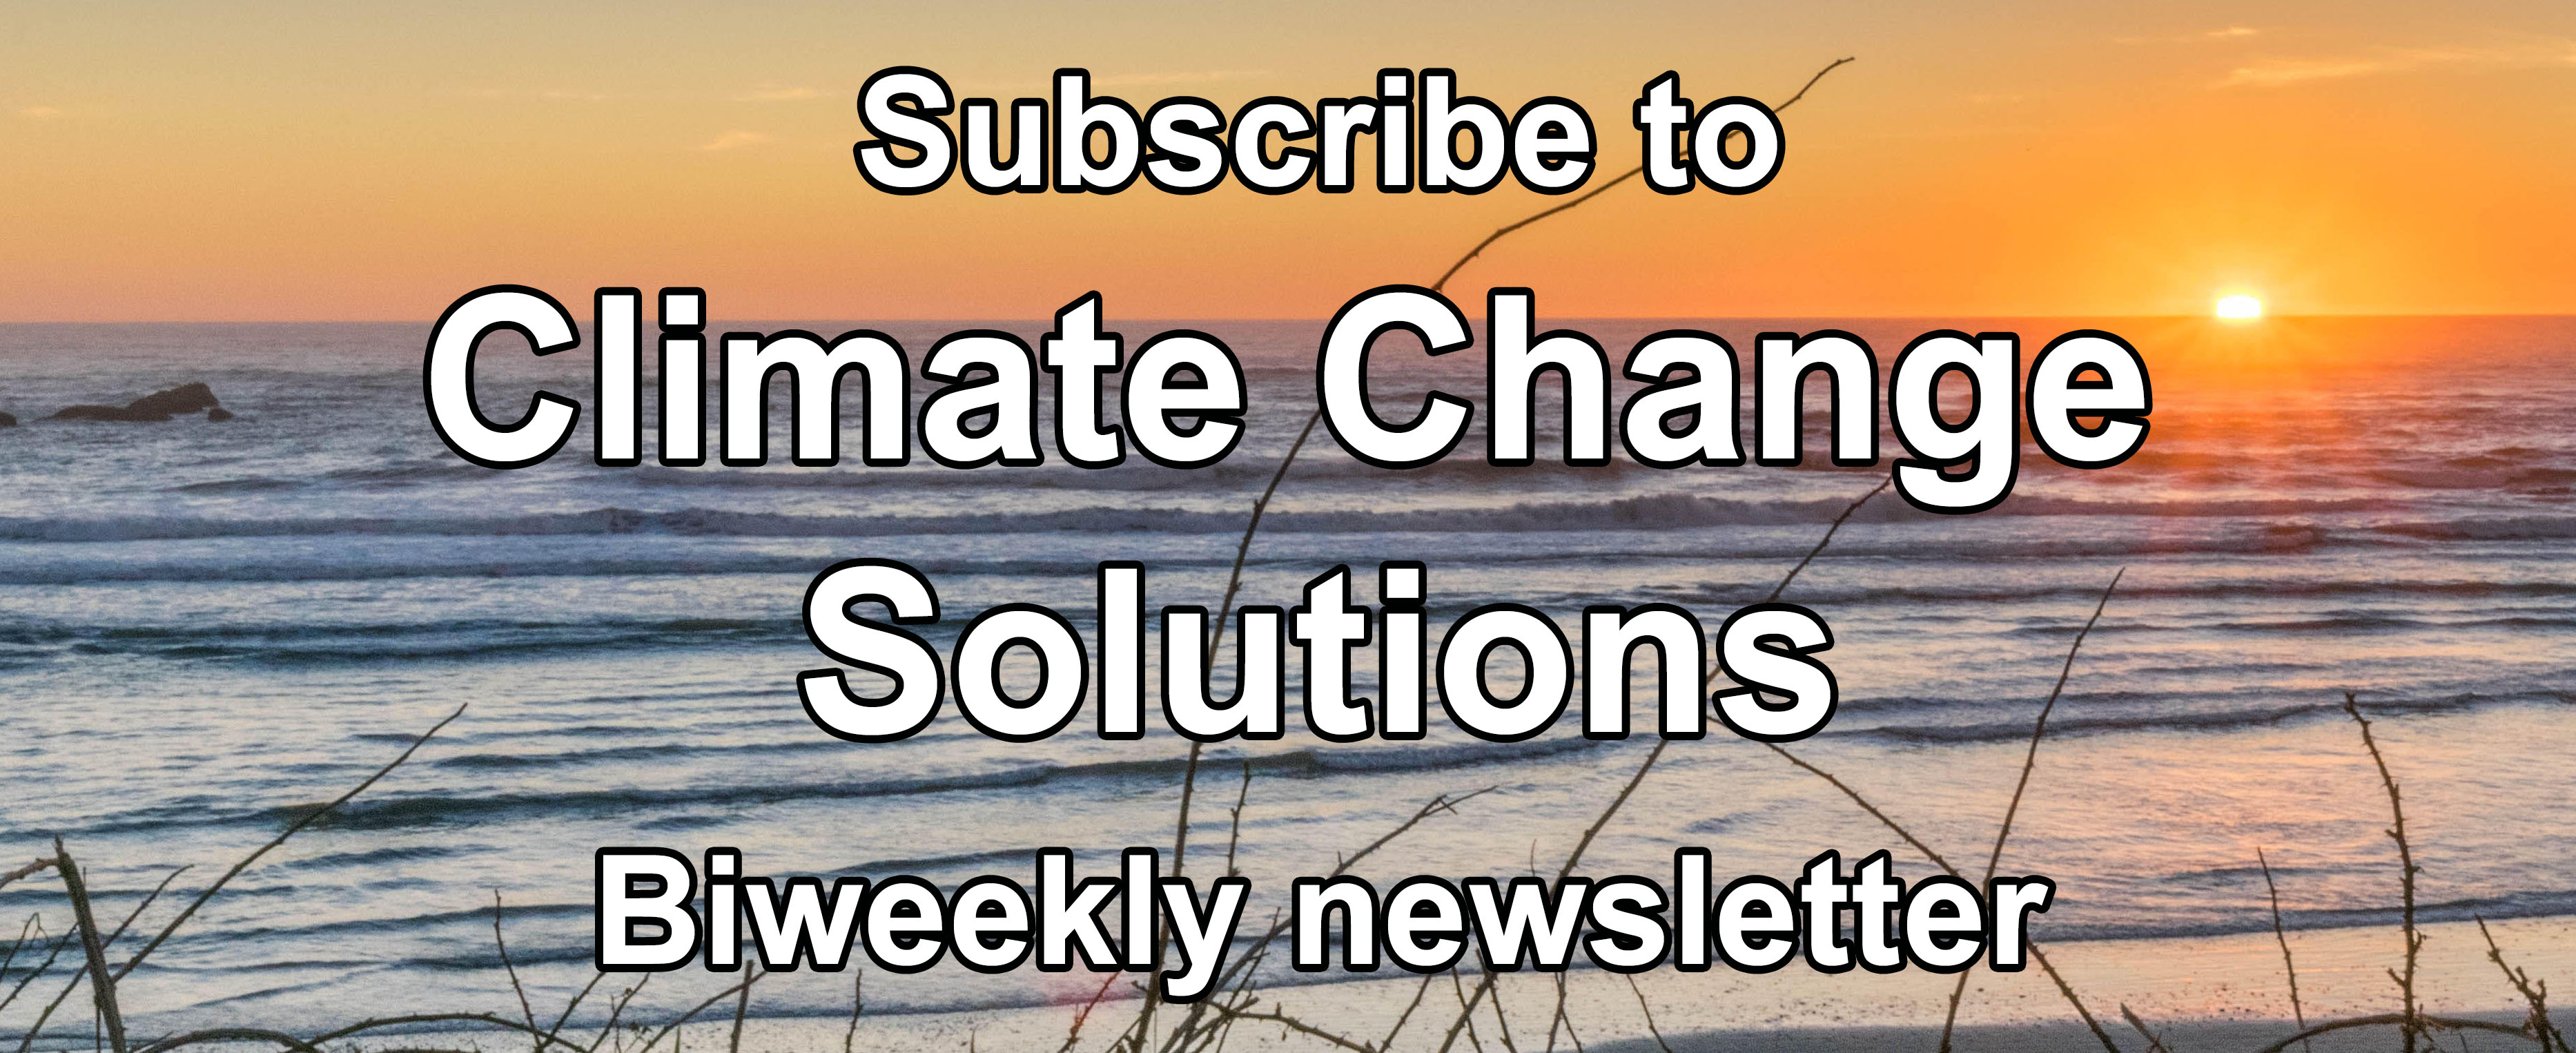 Subscribe to Climate Change Solutions